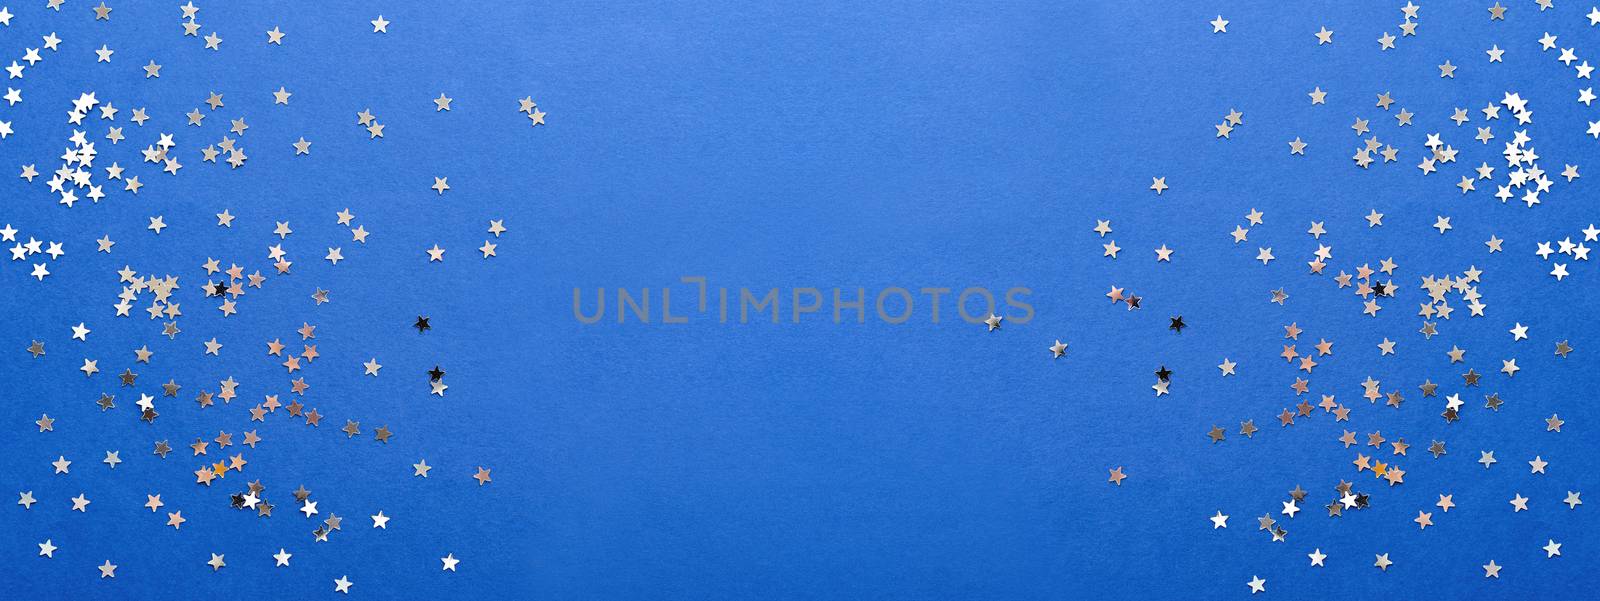 Holiday background with silver star confetti on blue background. Good backdrop for Christmas and New Year cards. by aksenovko